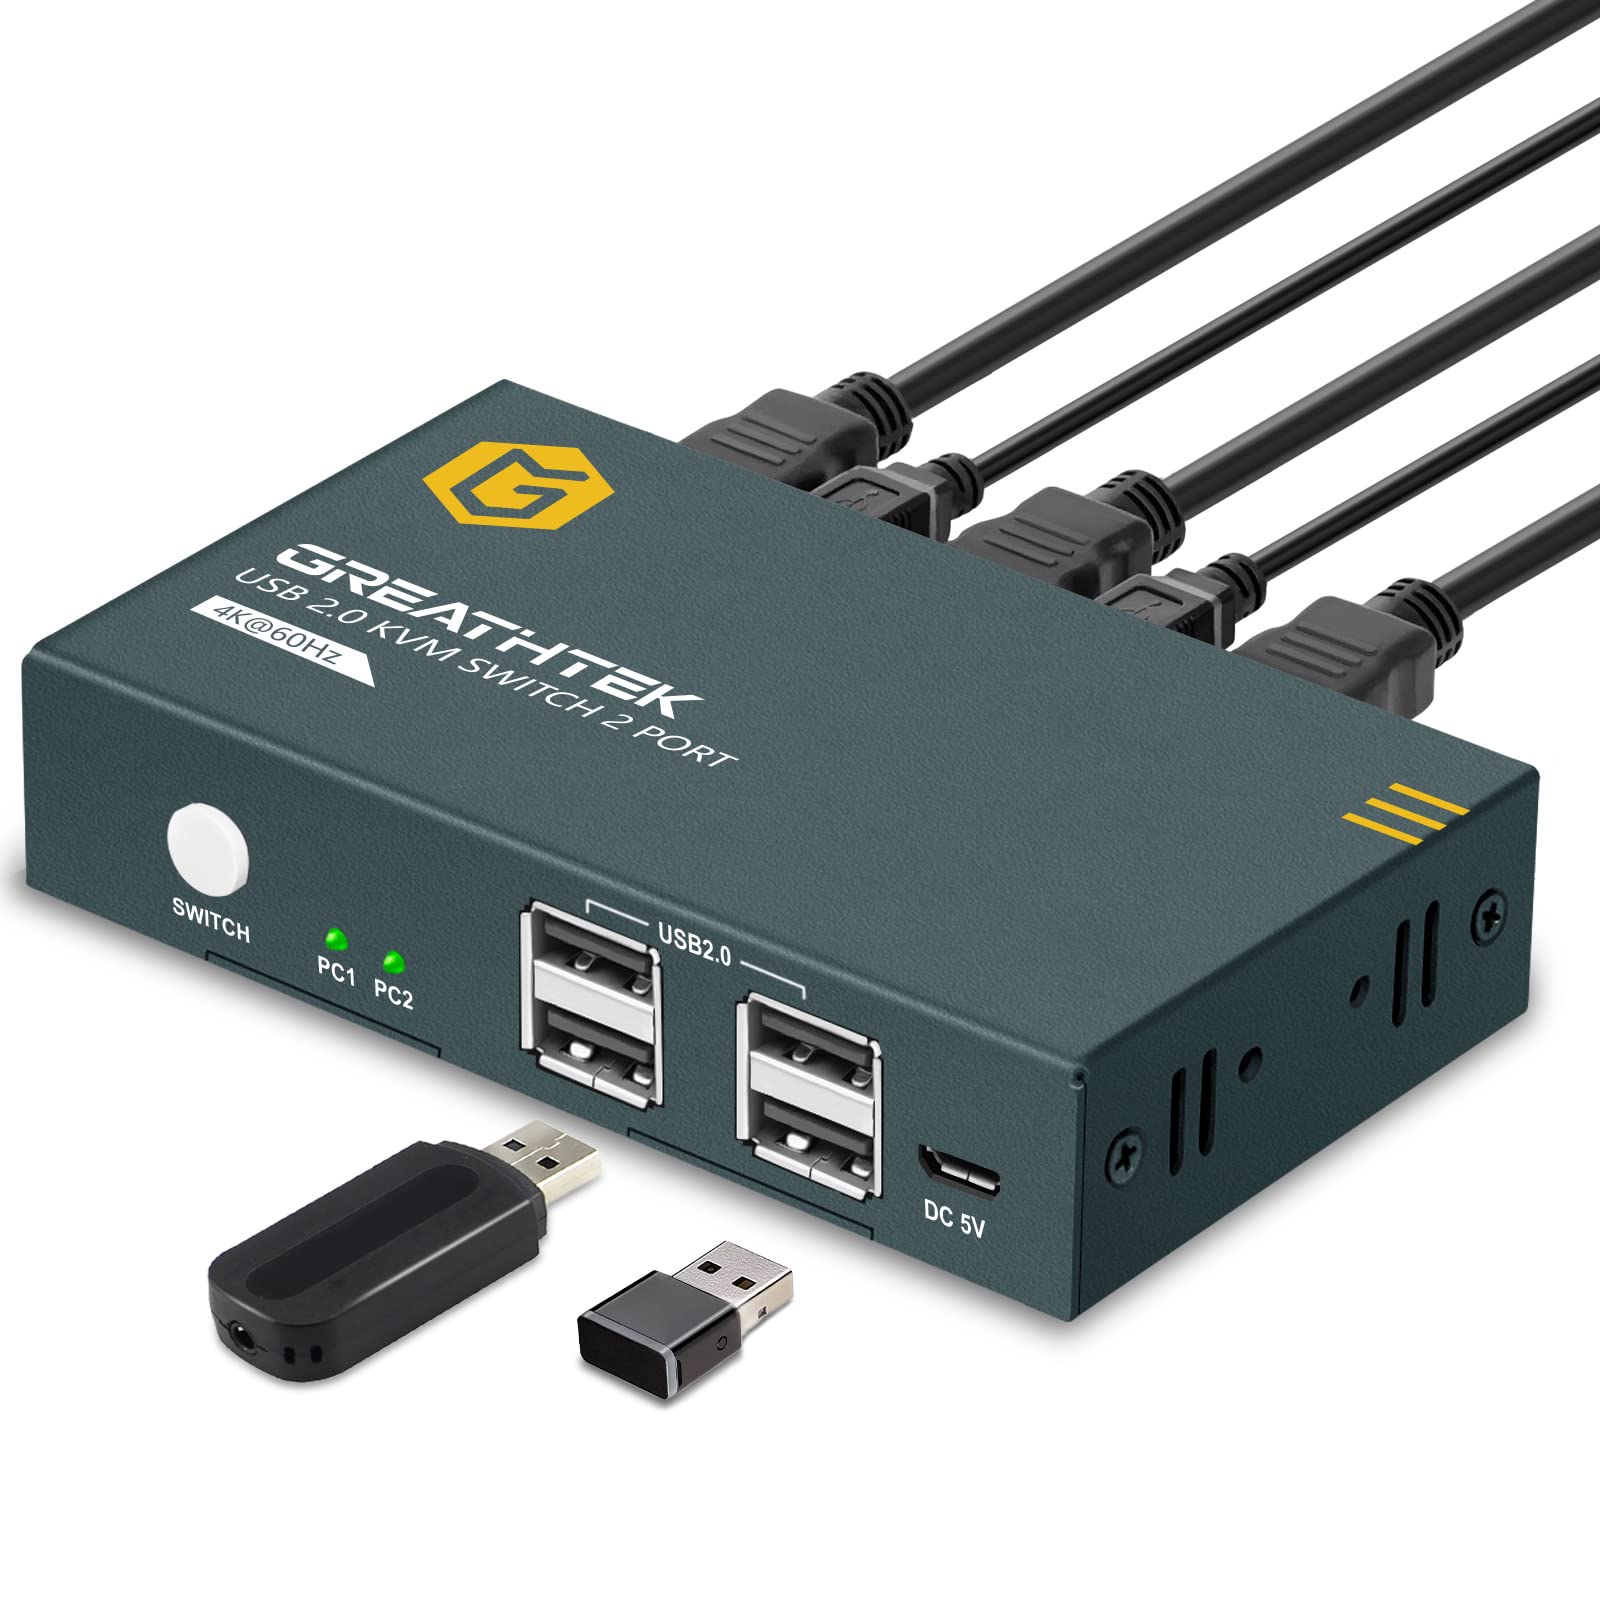 Product: KVM Switches 2 Port 4K@60Hz, GREATHTEK KVM Switch HDMI Share USB  2.0 Devices with 4 USB Hubs, 2 Computers 1 Monitor Share Keyboard